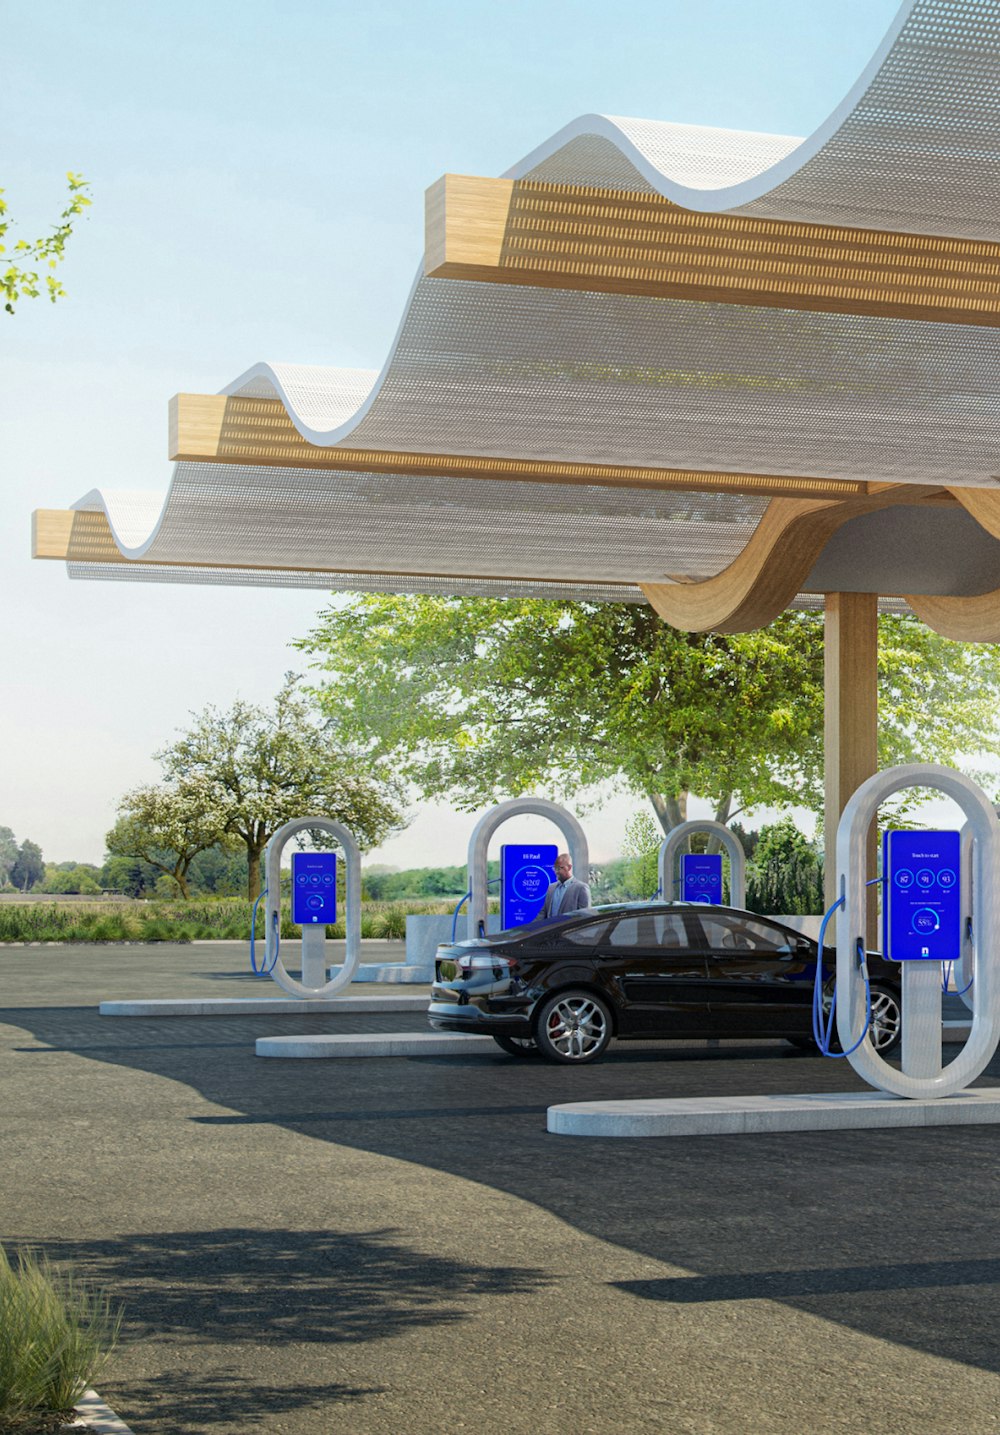 A photo-realistic rendering of the pumps at the future Nacero gasoline station